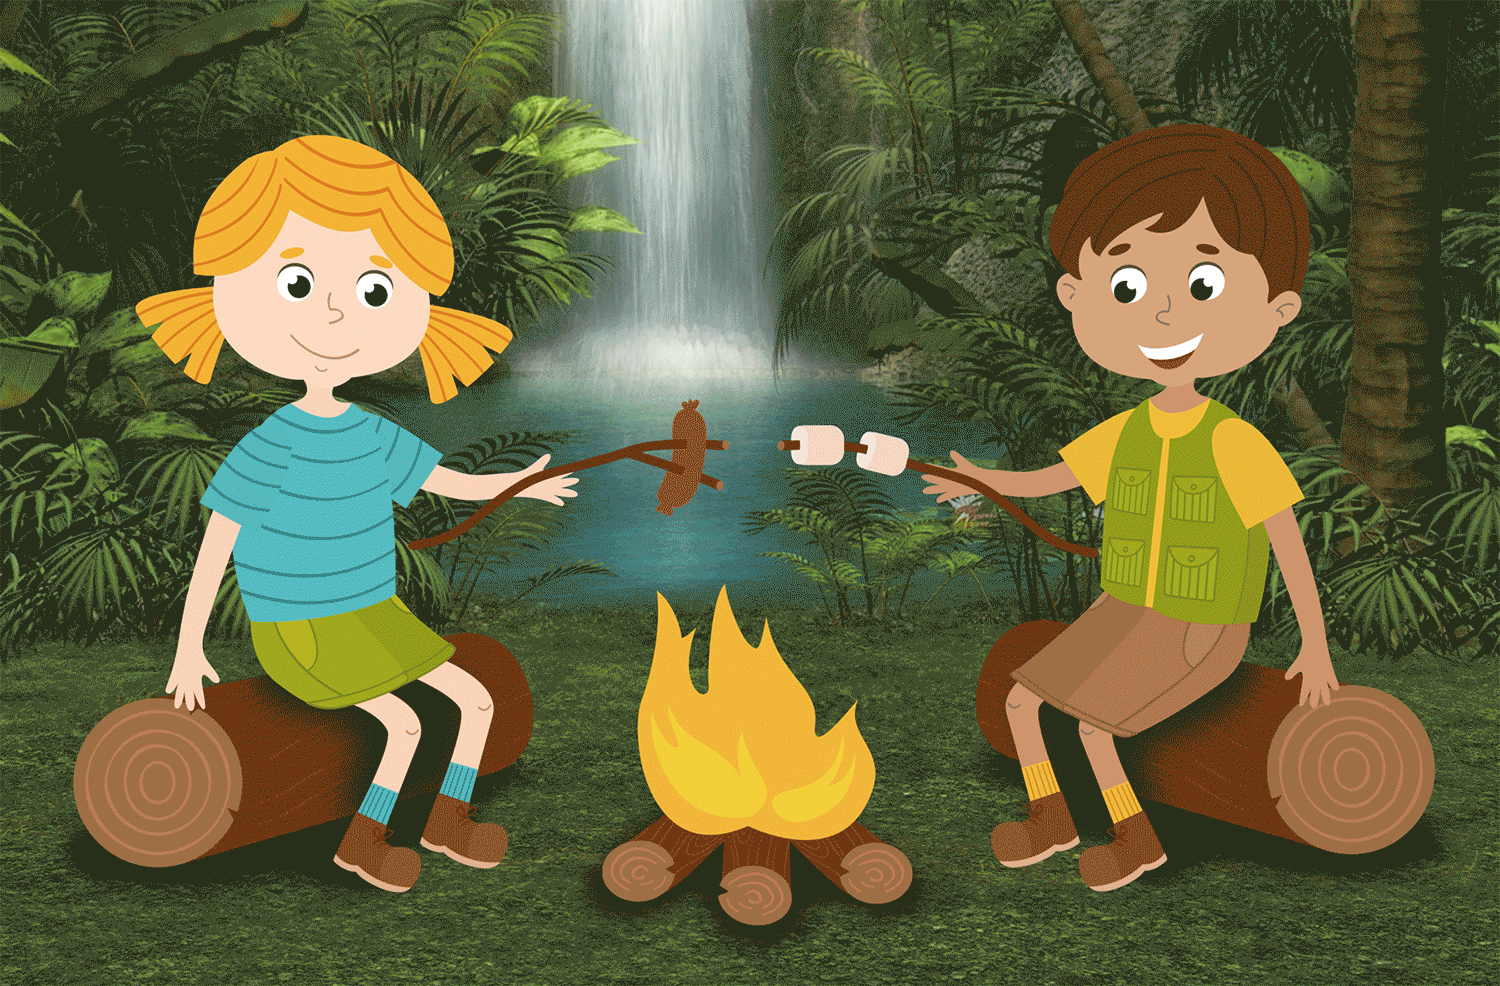 Two kids sit at a campfire and mosquitoes fly to only one of the kids as the other kid reacts.